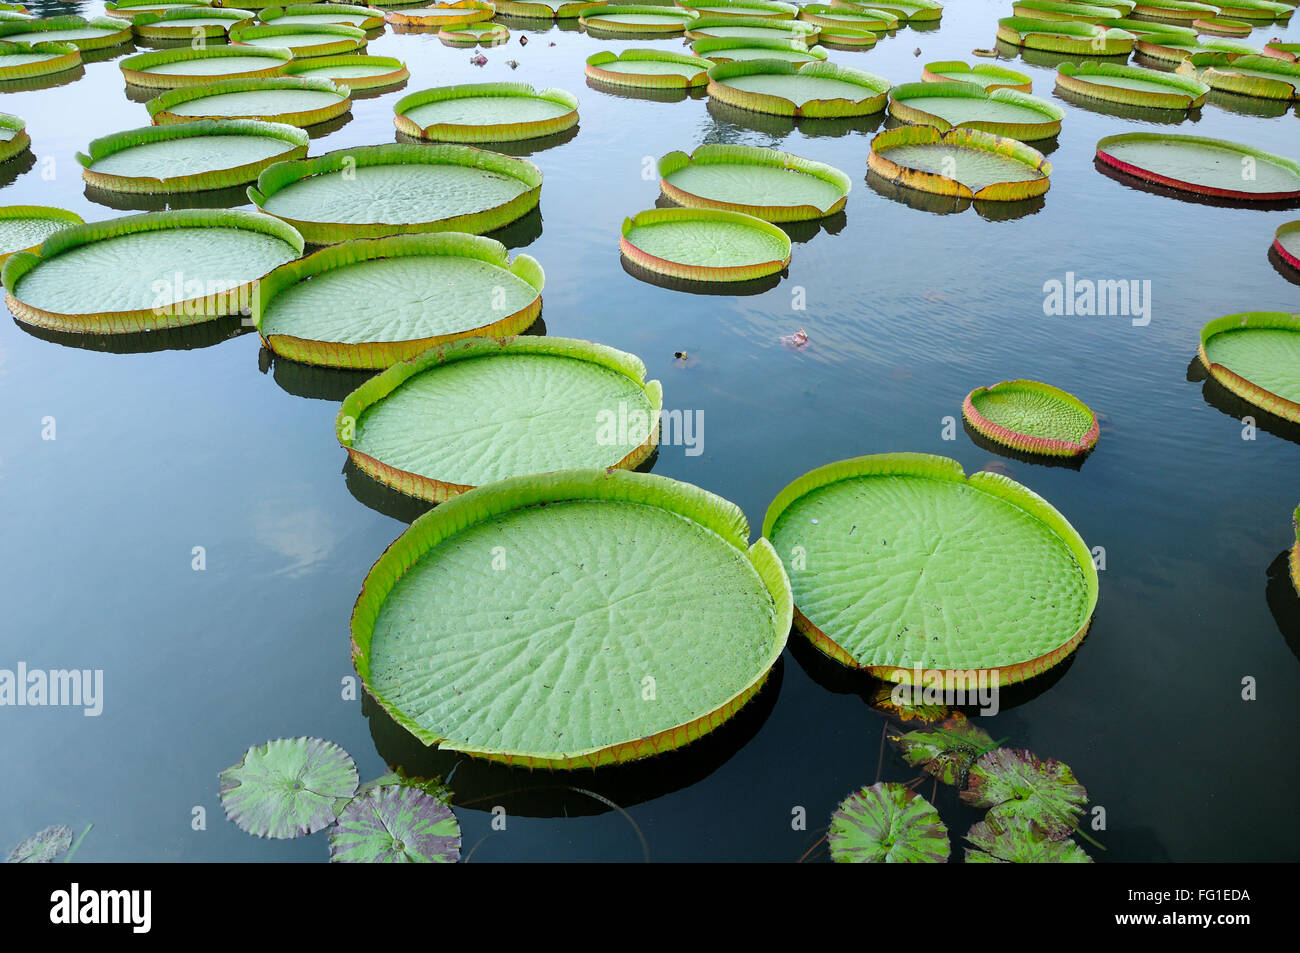 Giant Lily Pads floating on a pond at Chenshan Botanical Garden in Songjiang district of Shanghai China. Stock Photo